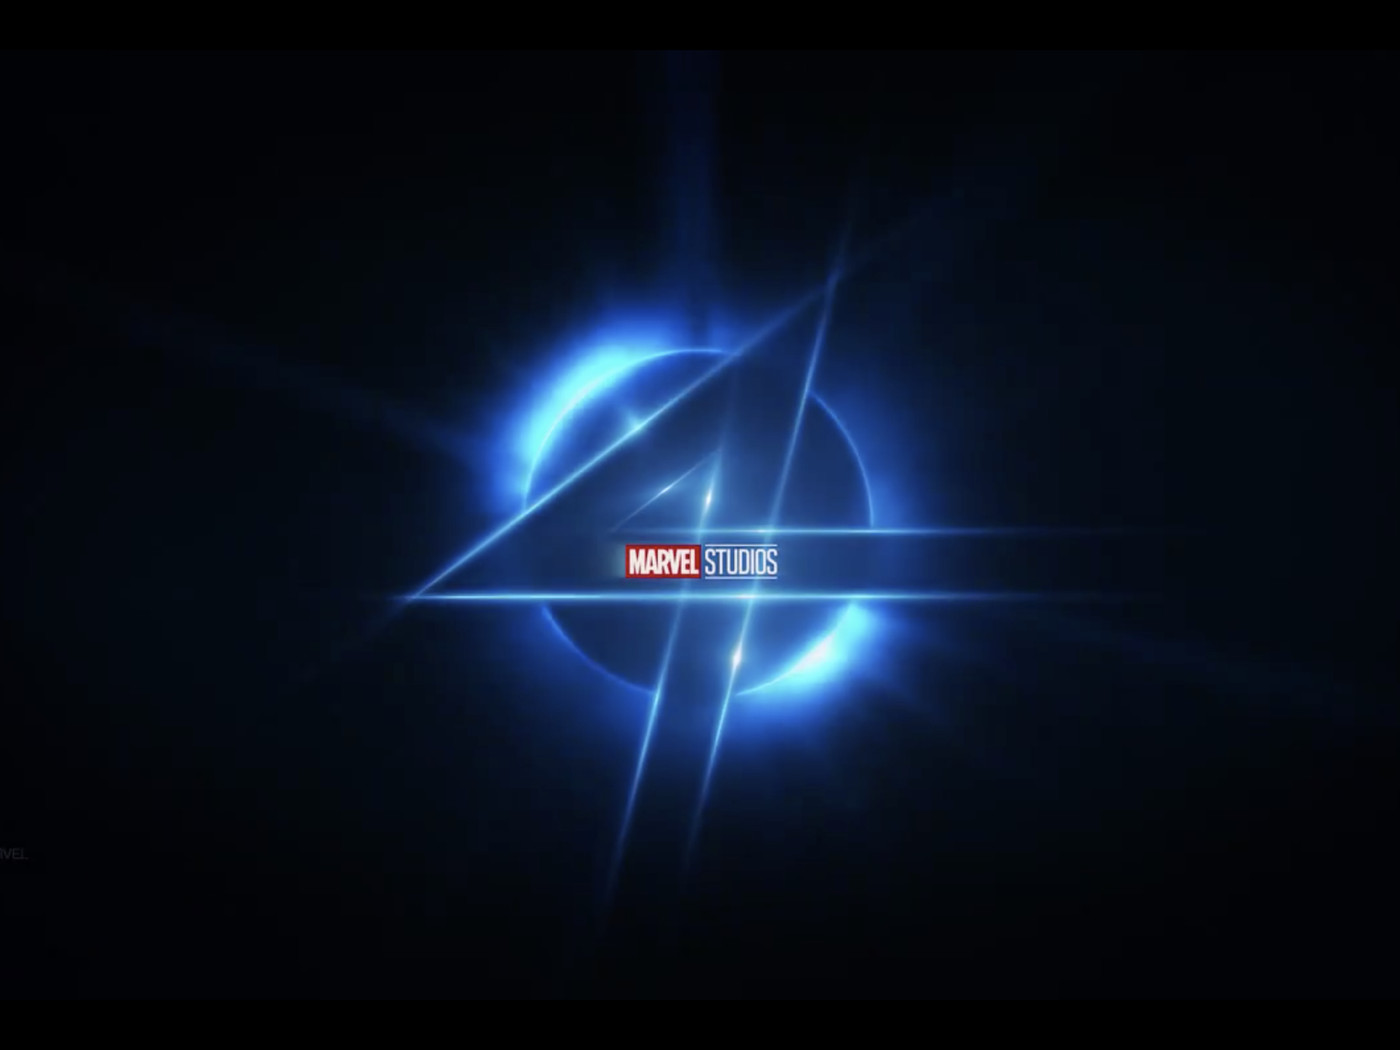 A new Fantastic Four movie is coming from Marvel Studios